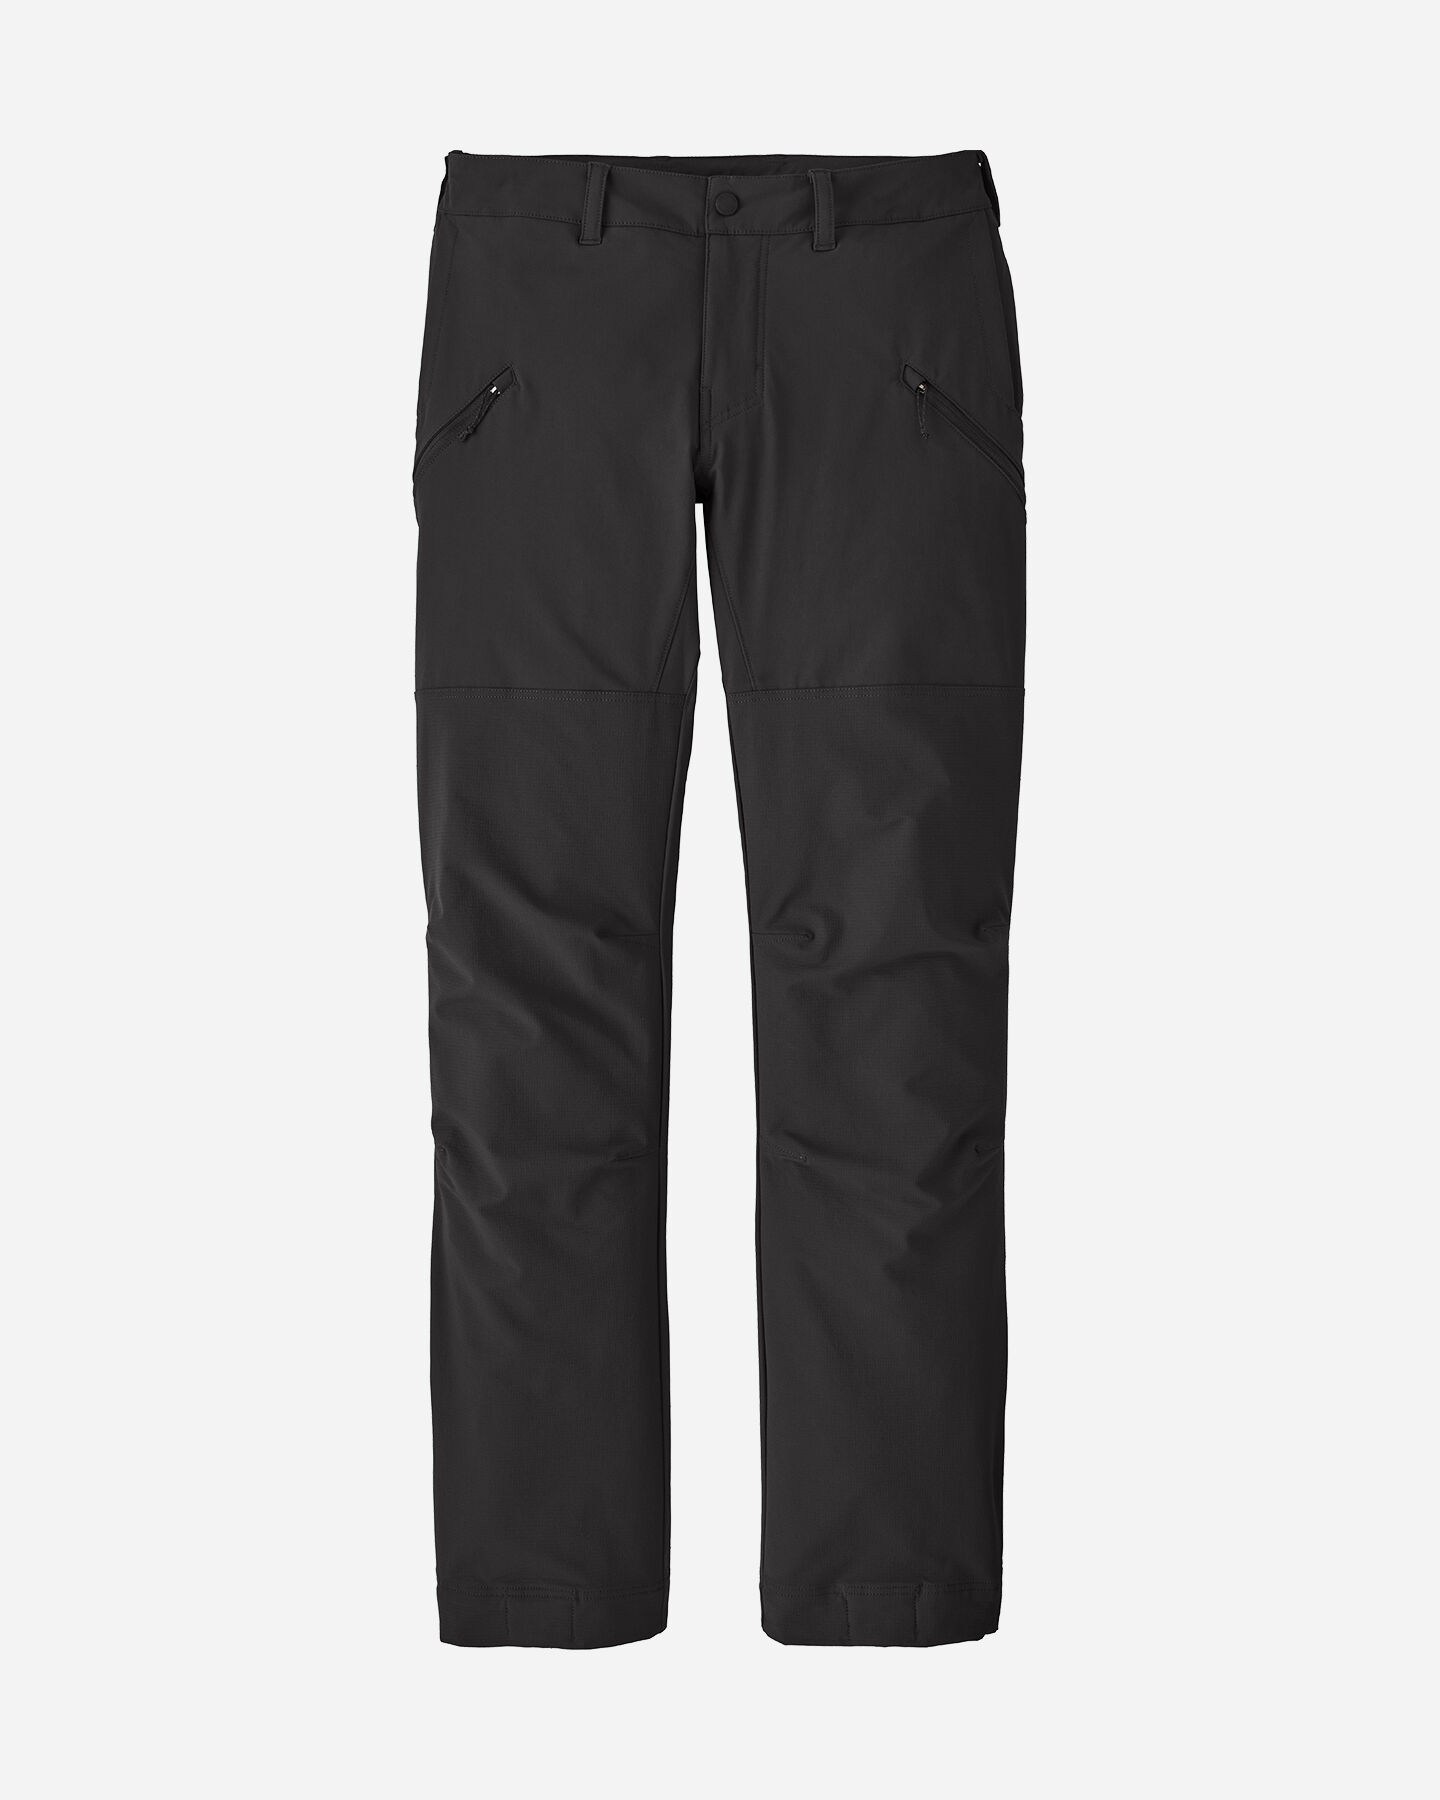  Pantalone outdoor PATAGONIA POINT PEAK TRAIL W S5443260|BLK|10 scatto 0